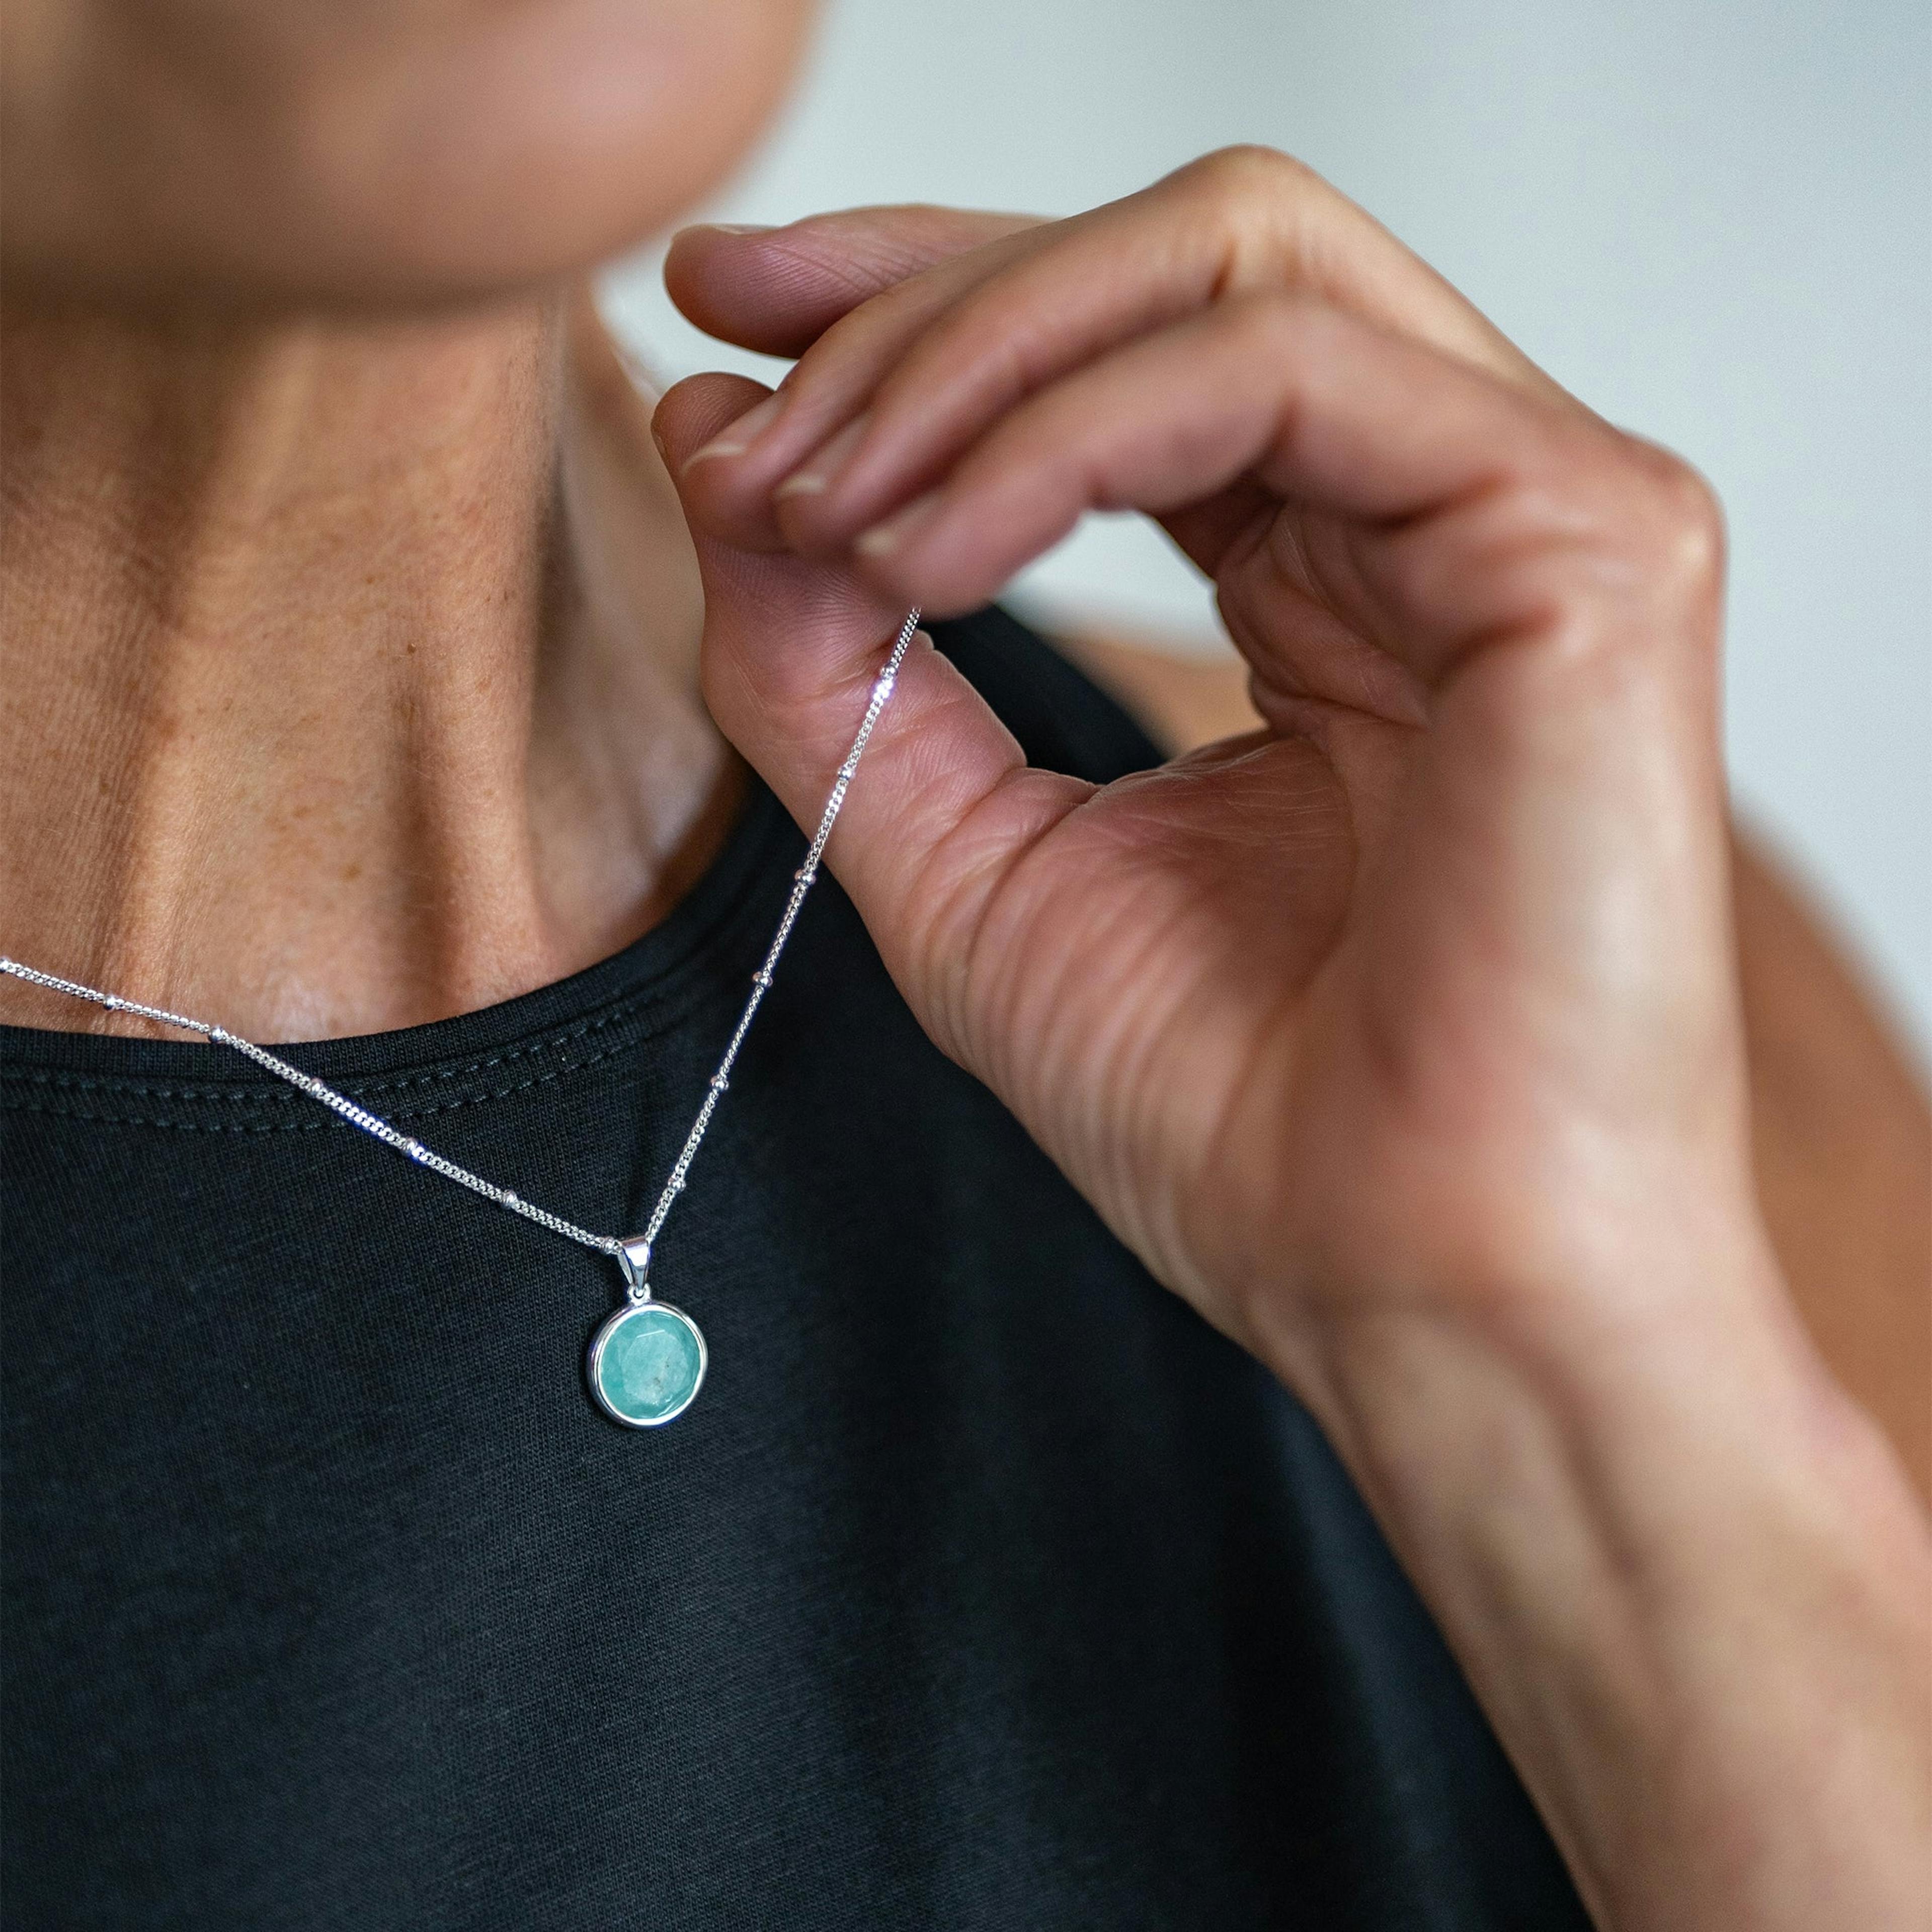 Recycled Silver Amazonite Pendant Necklace